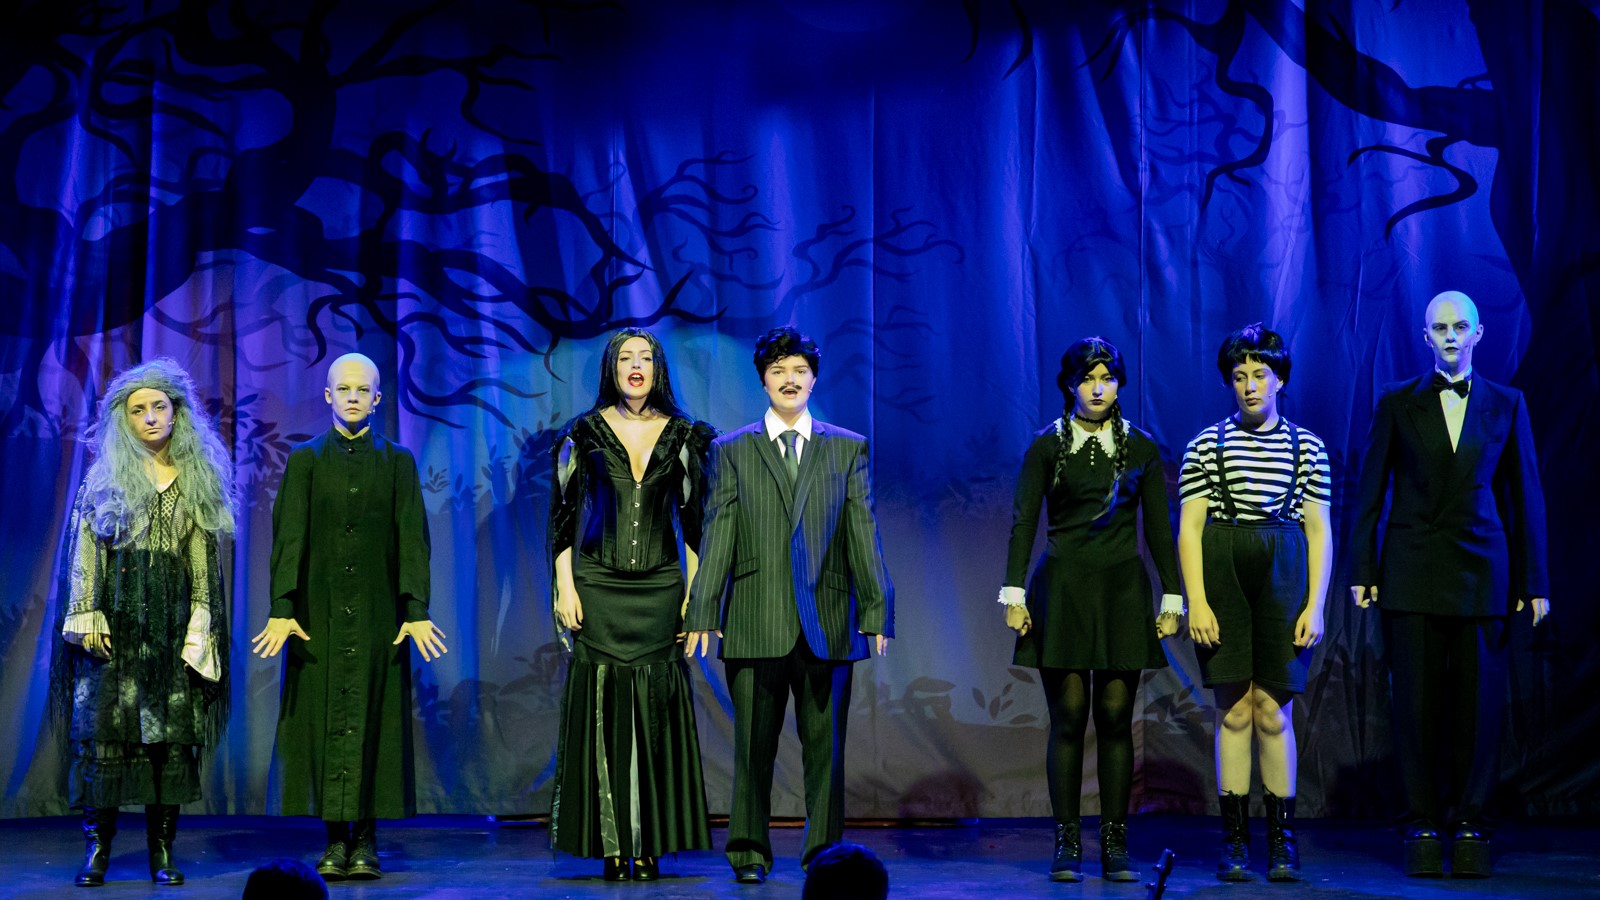 School Show – The Addams Family